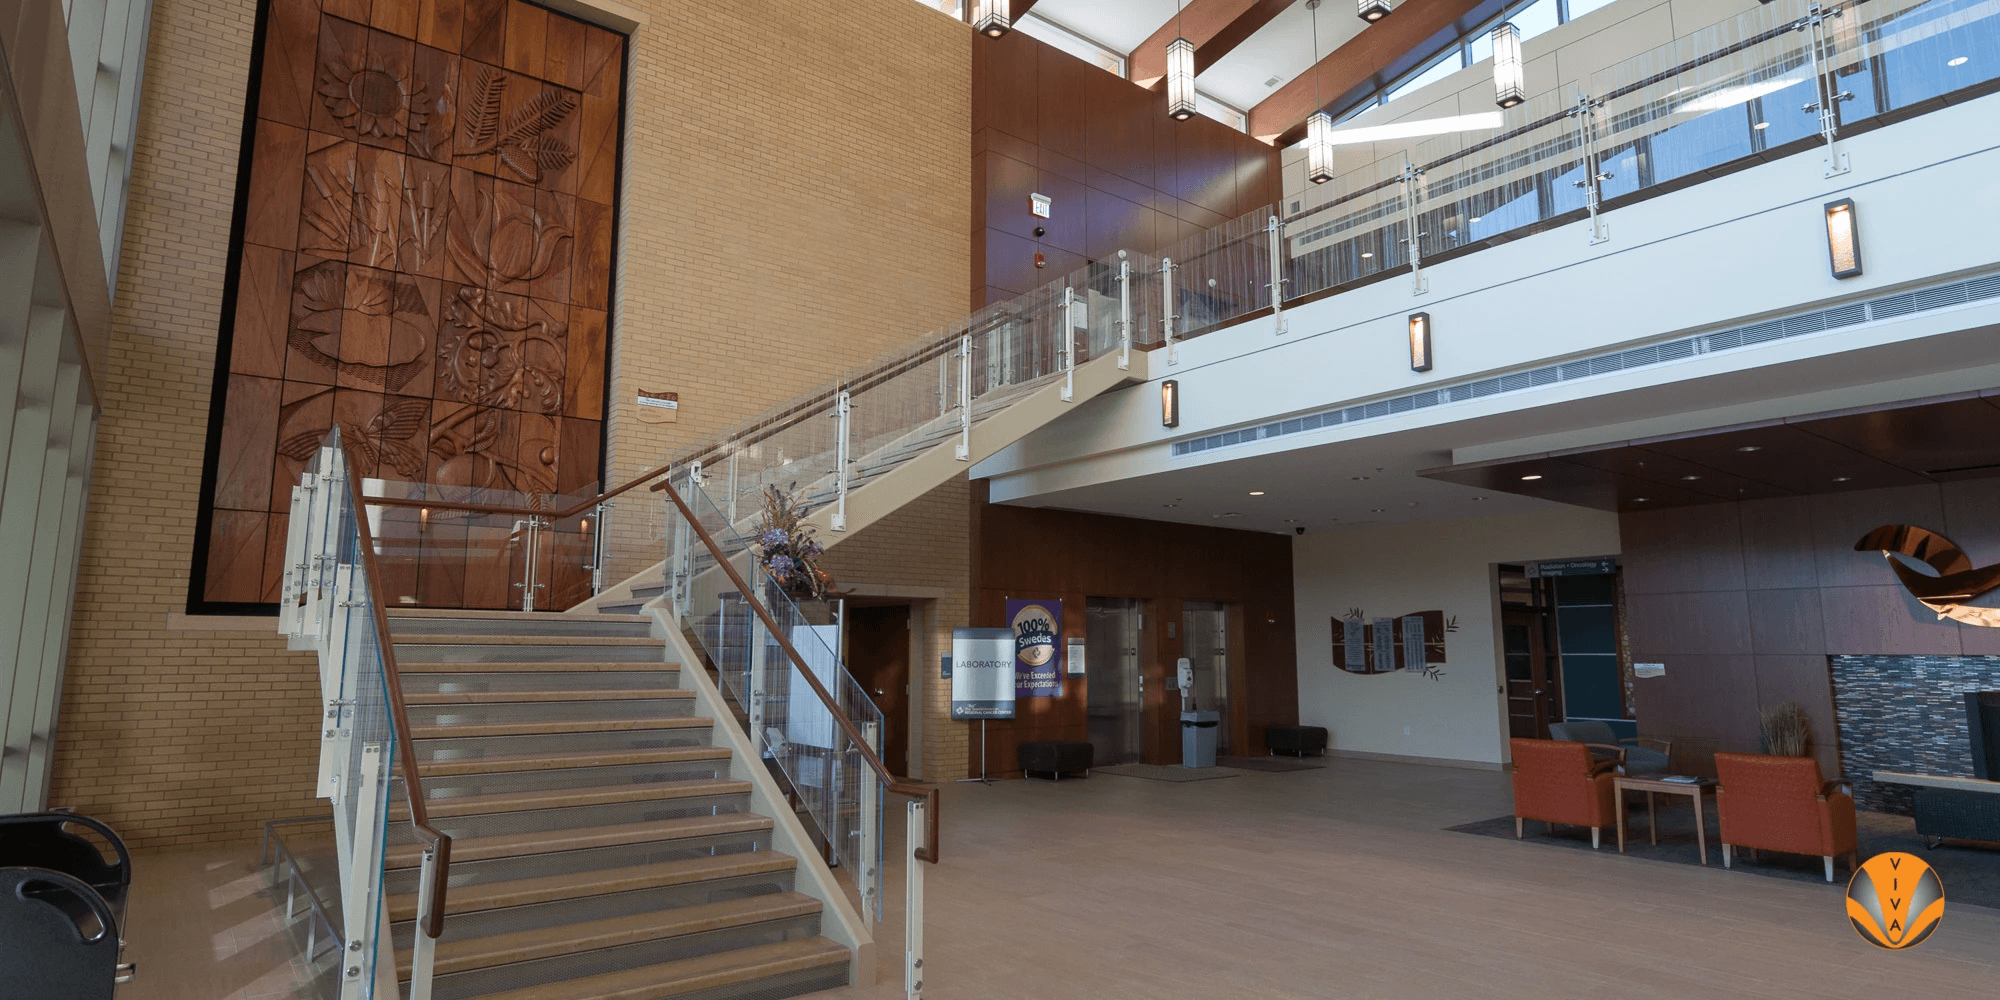 Wooden Hospital Handrails and Staircase